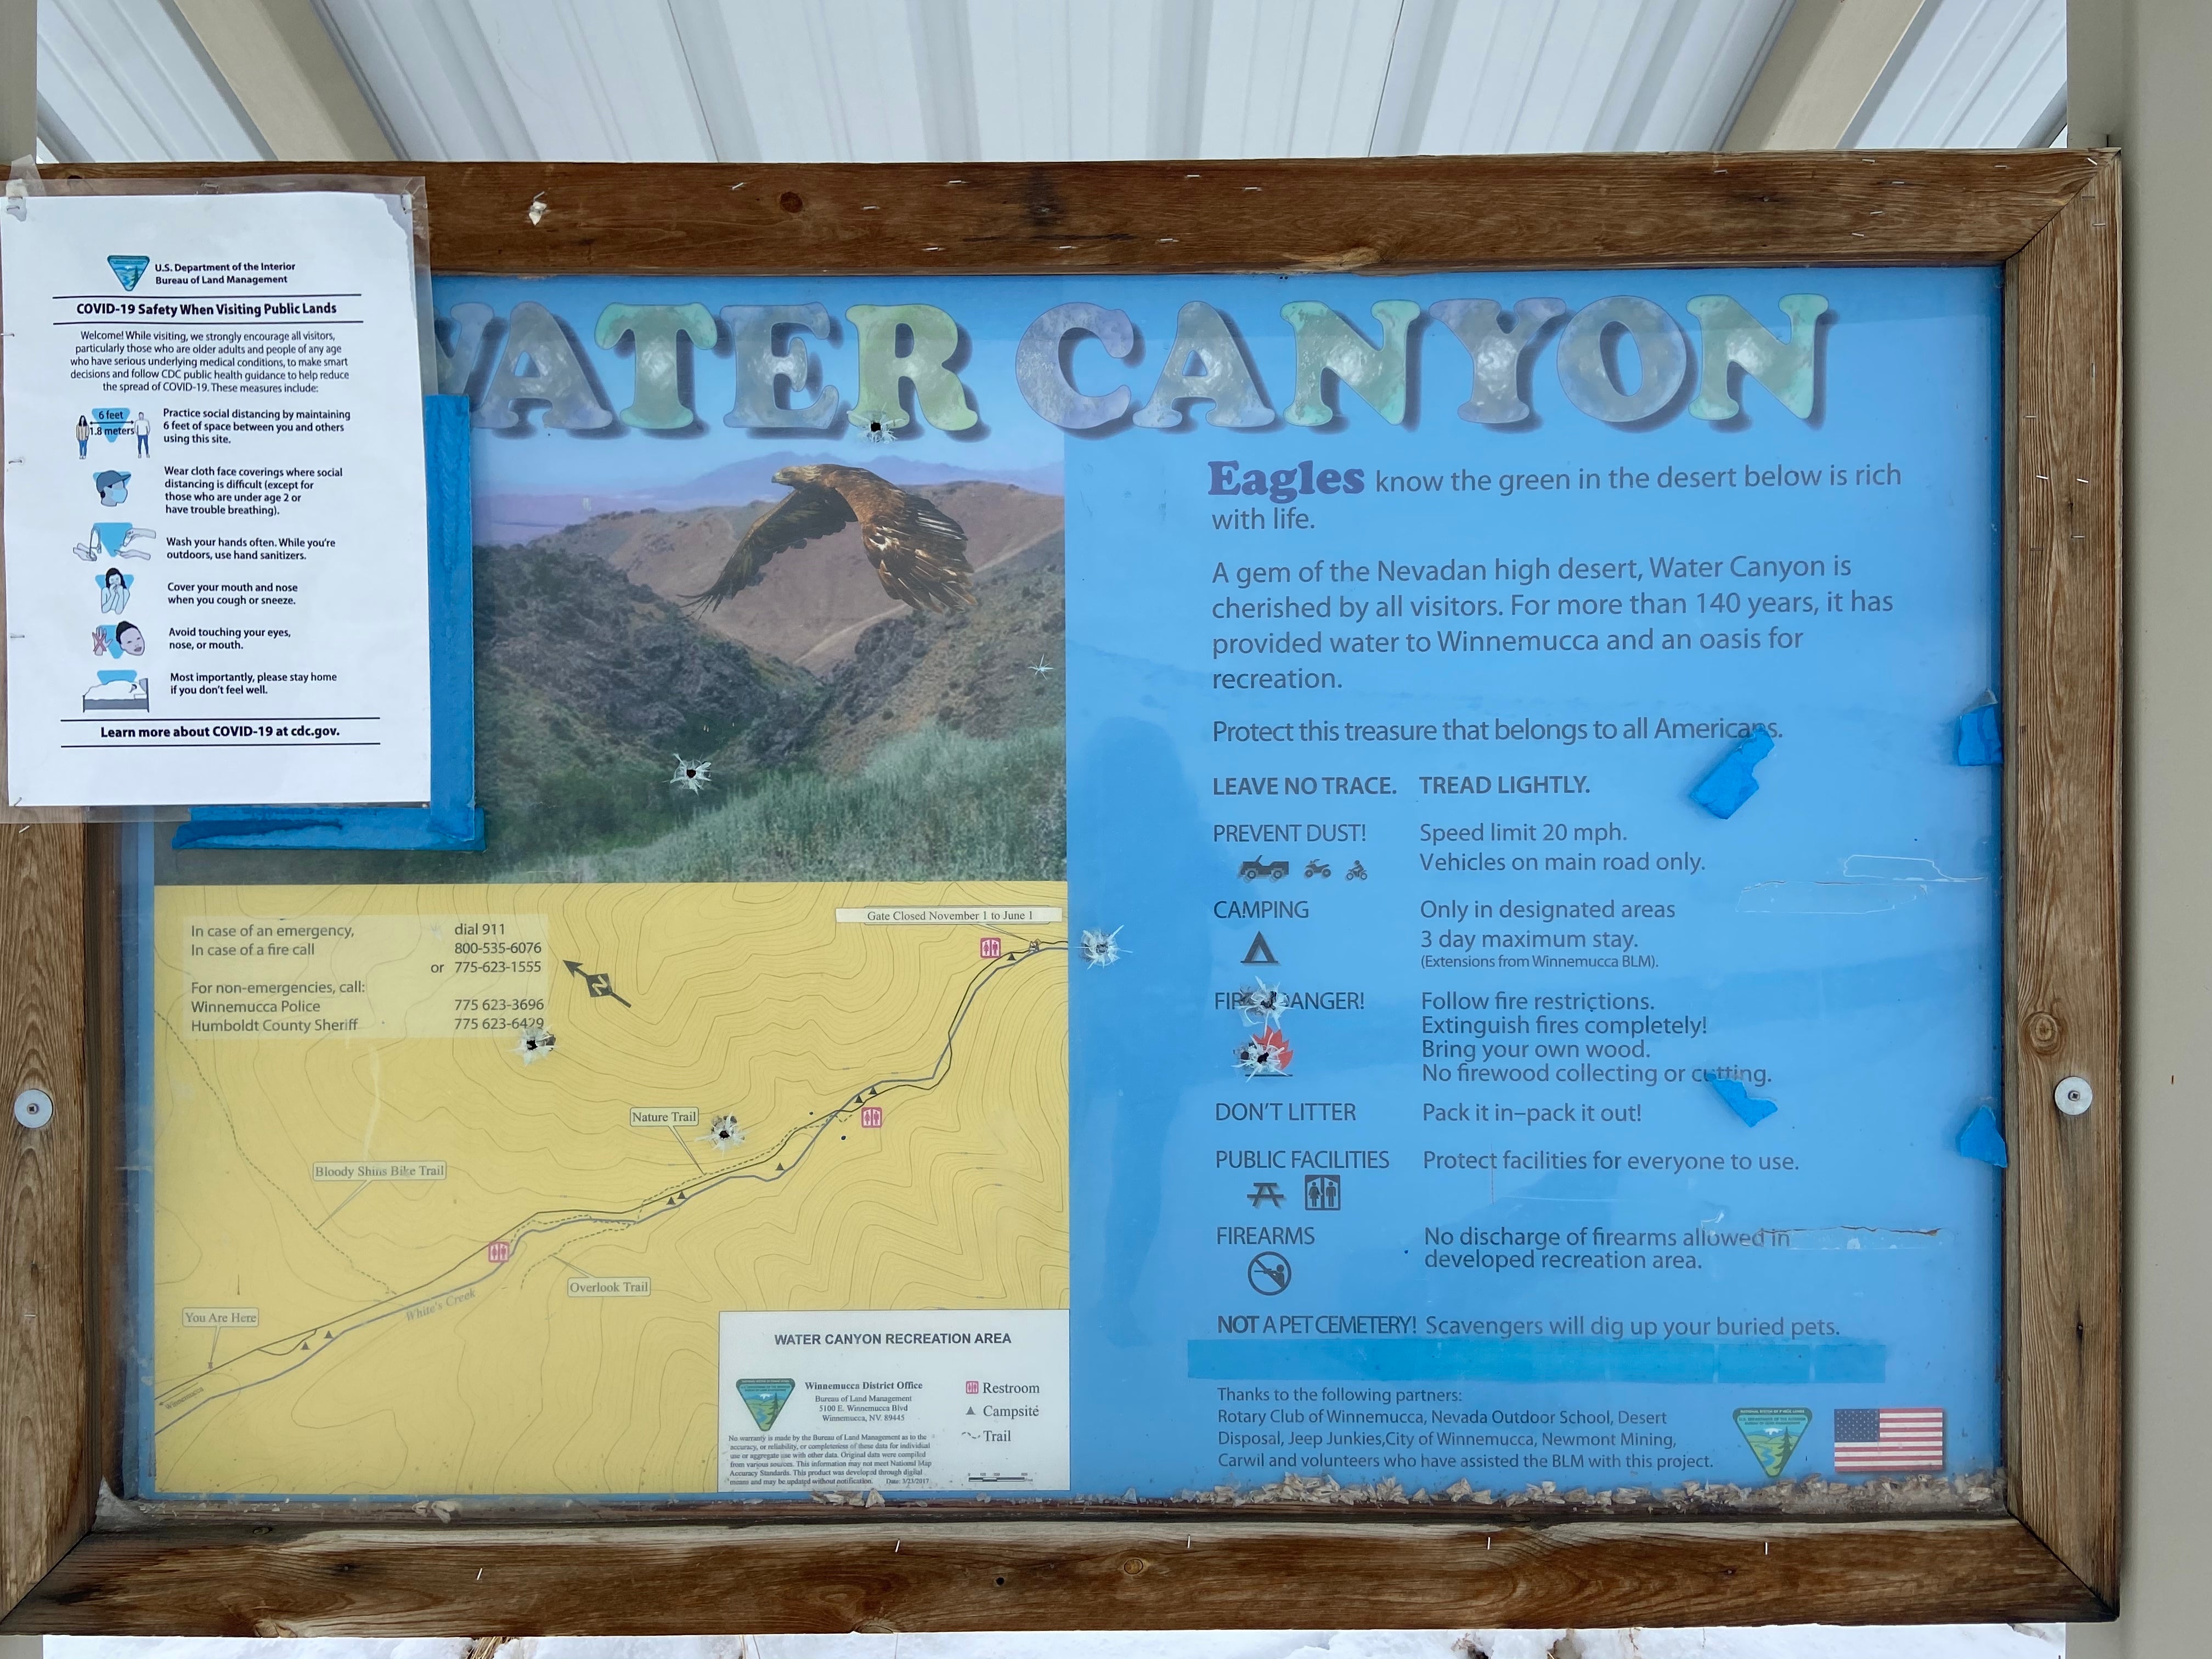 Camper submitted image from Water Canyon Recreation Area - 1